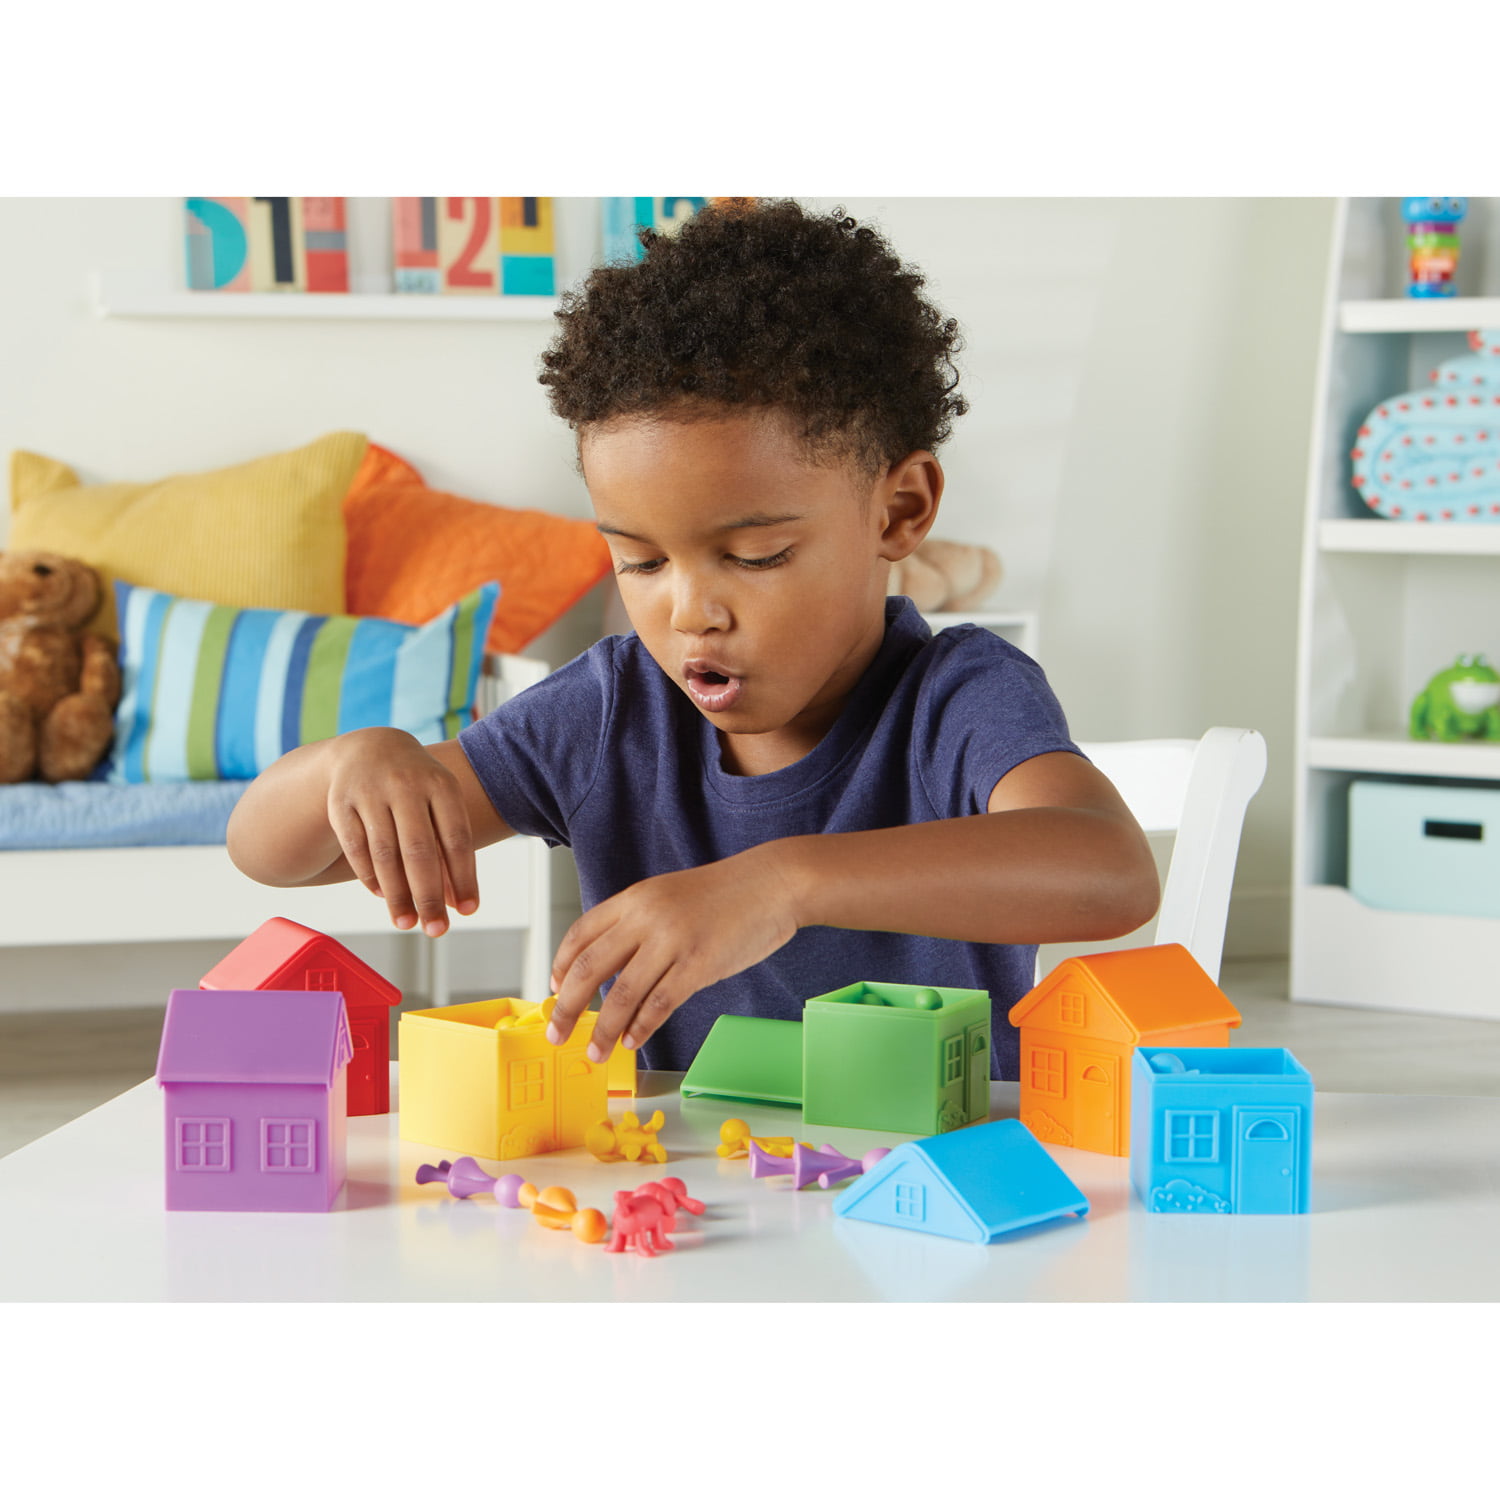 Montessori Toys 6 Pieces Special Education Actives Imaginative Play Fine Motor & Sorting Skills Learning Resources All About Me Sorting Neighborhood 